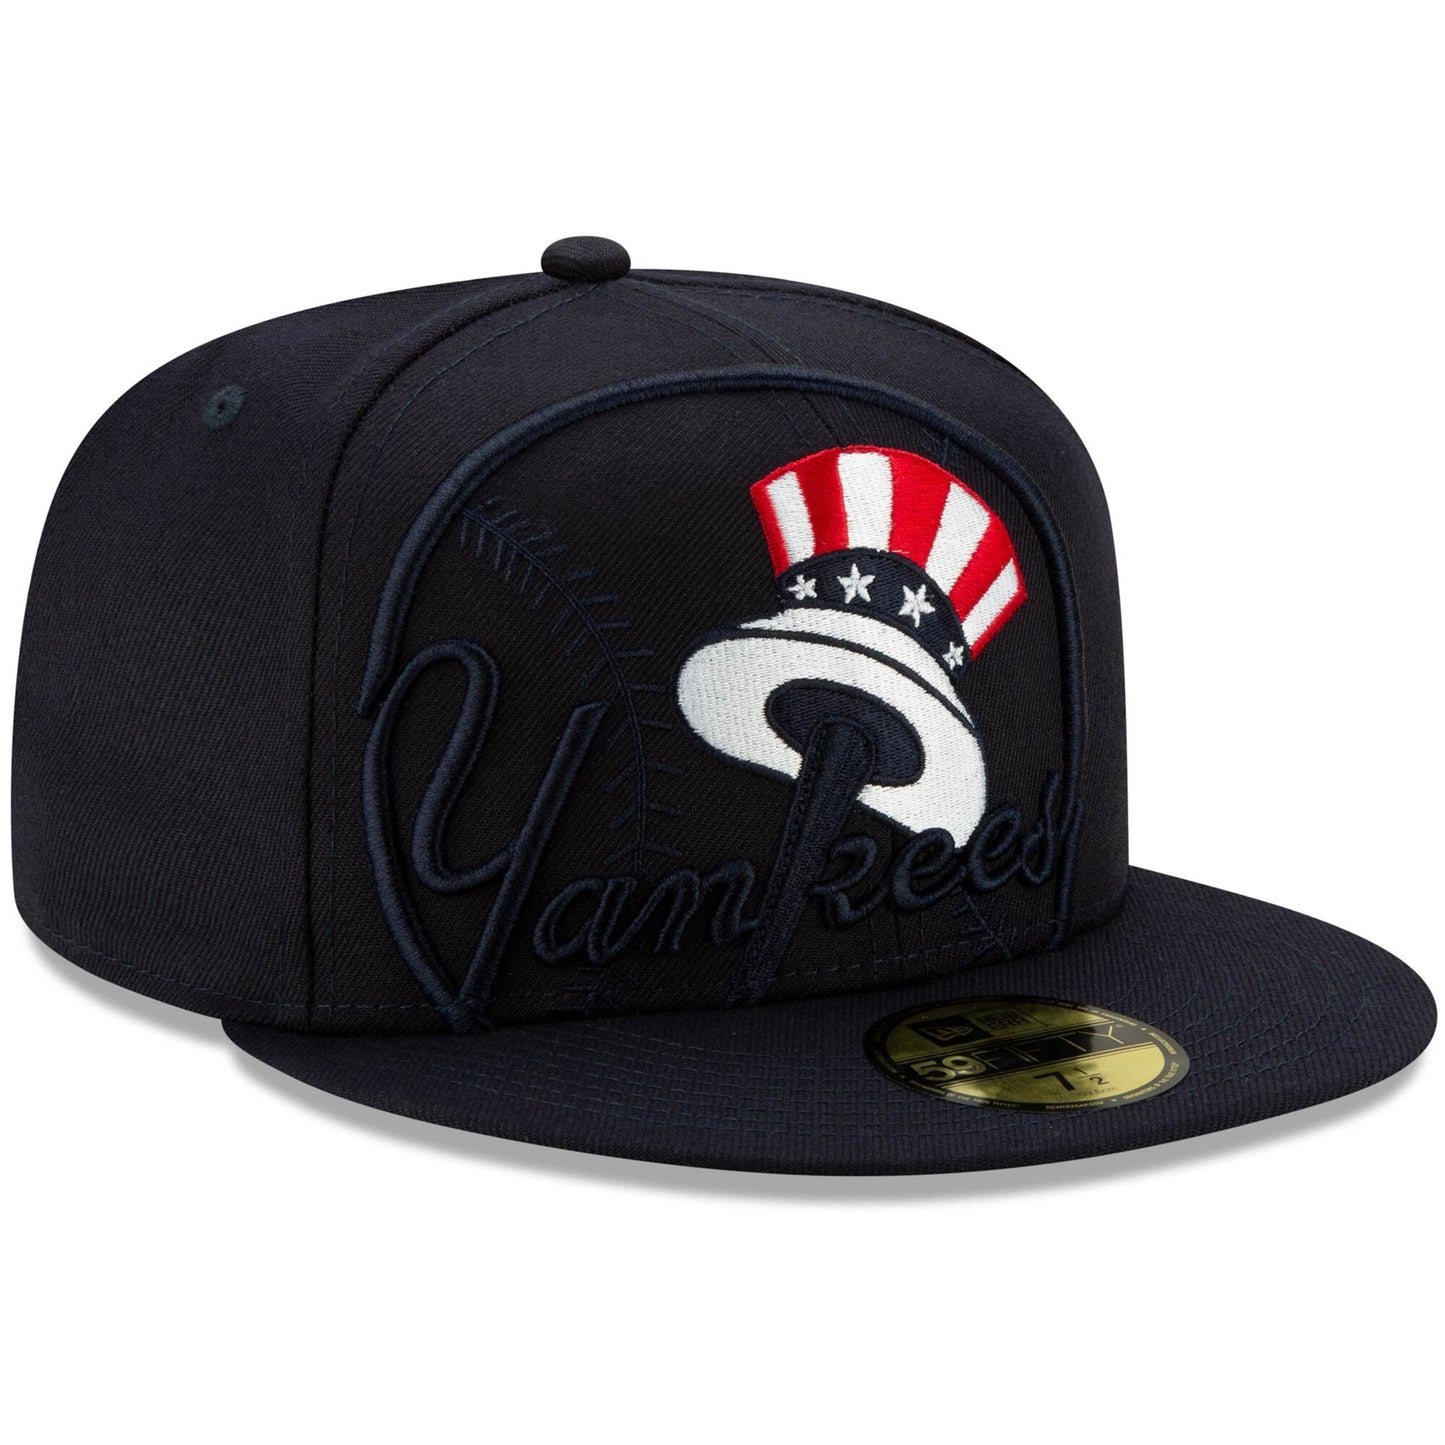 NEW YORK YANKEES LOGO ELEMENTS 5950 FITTED